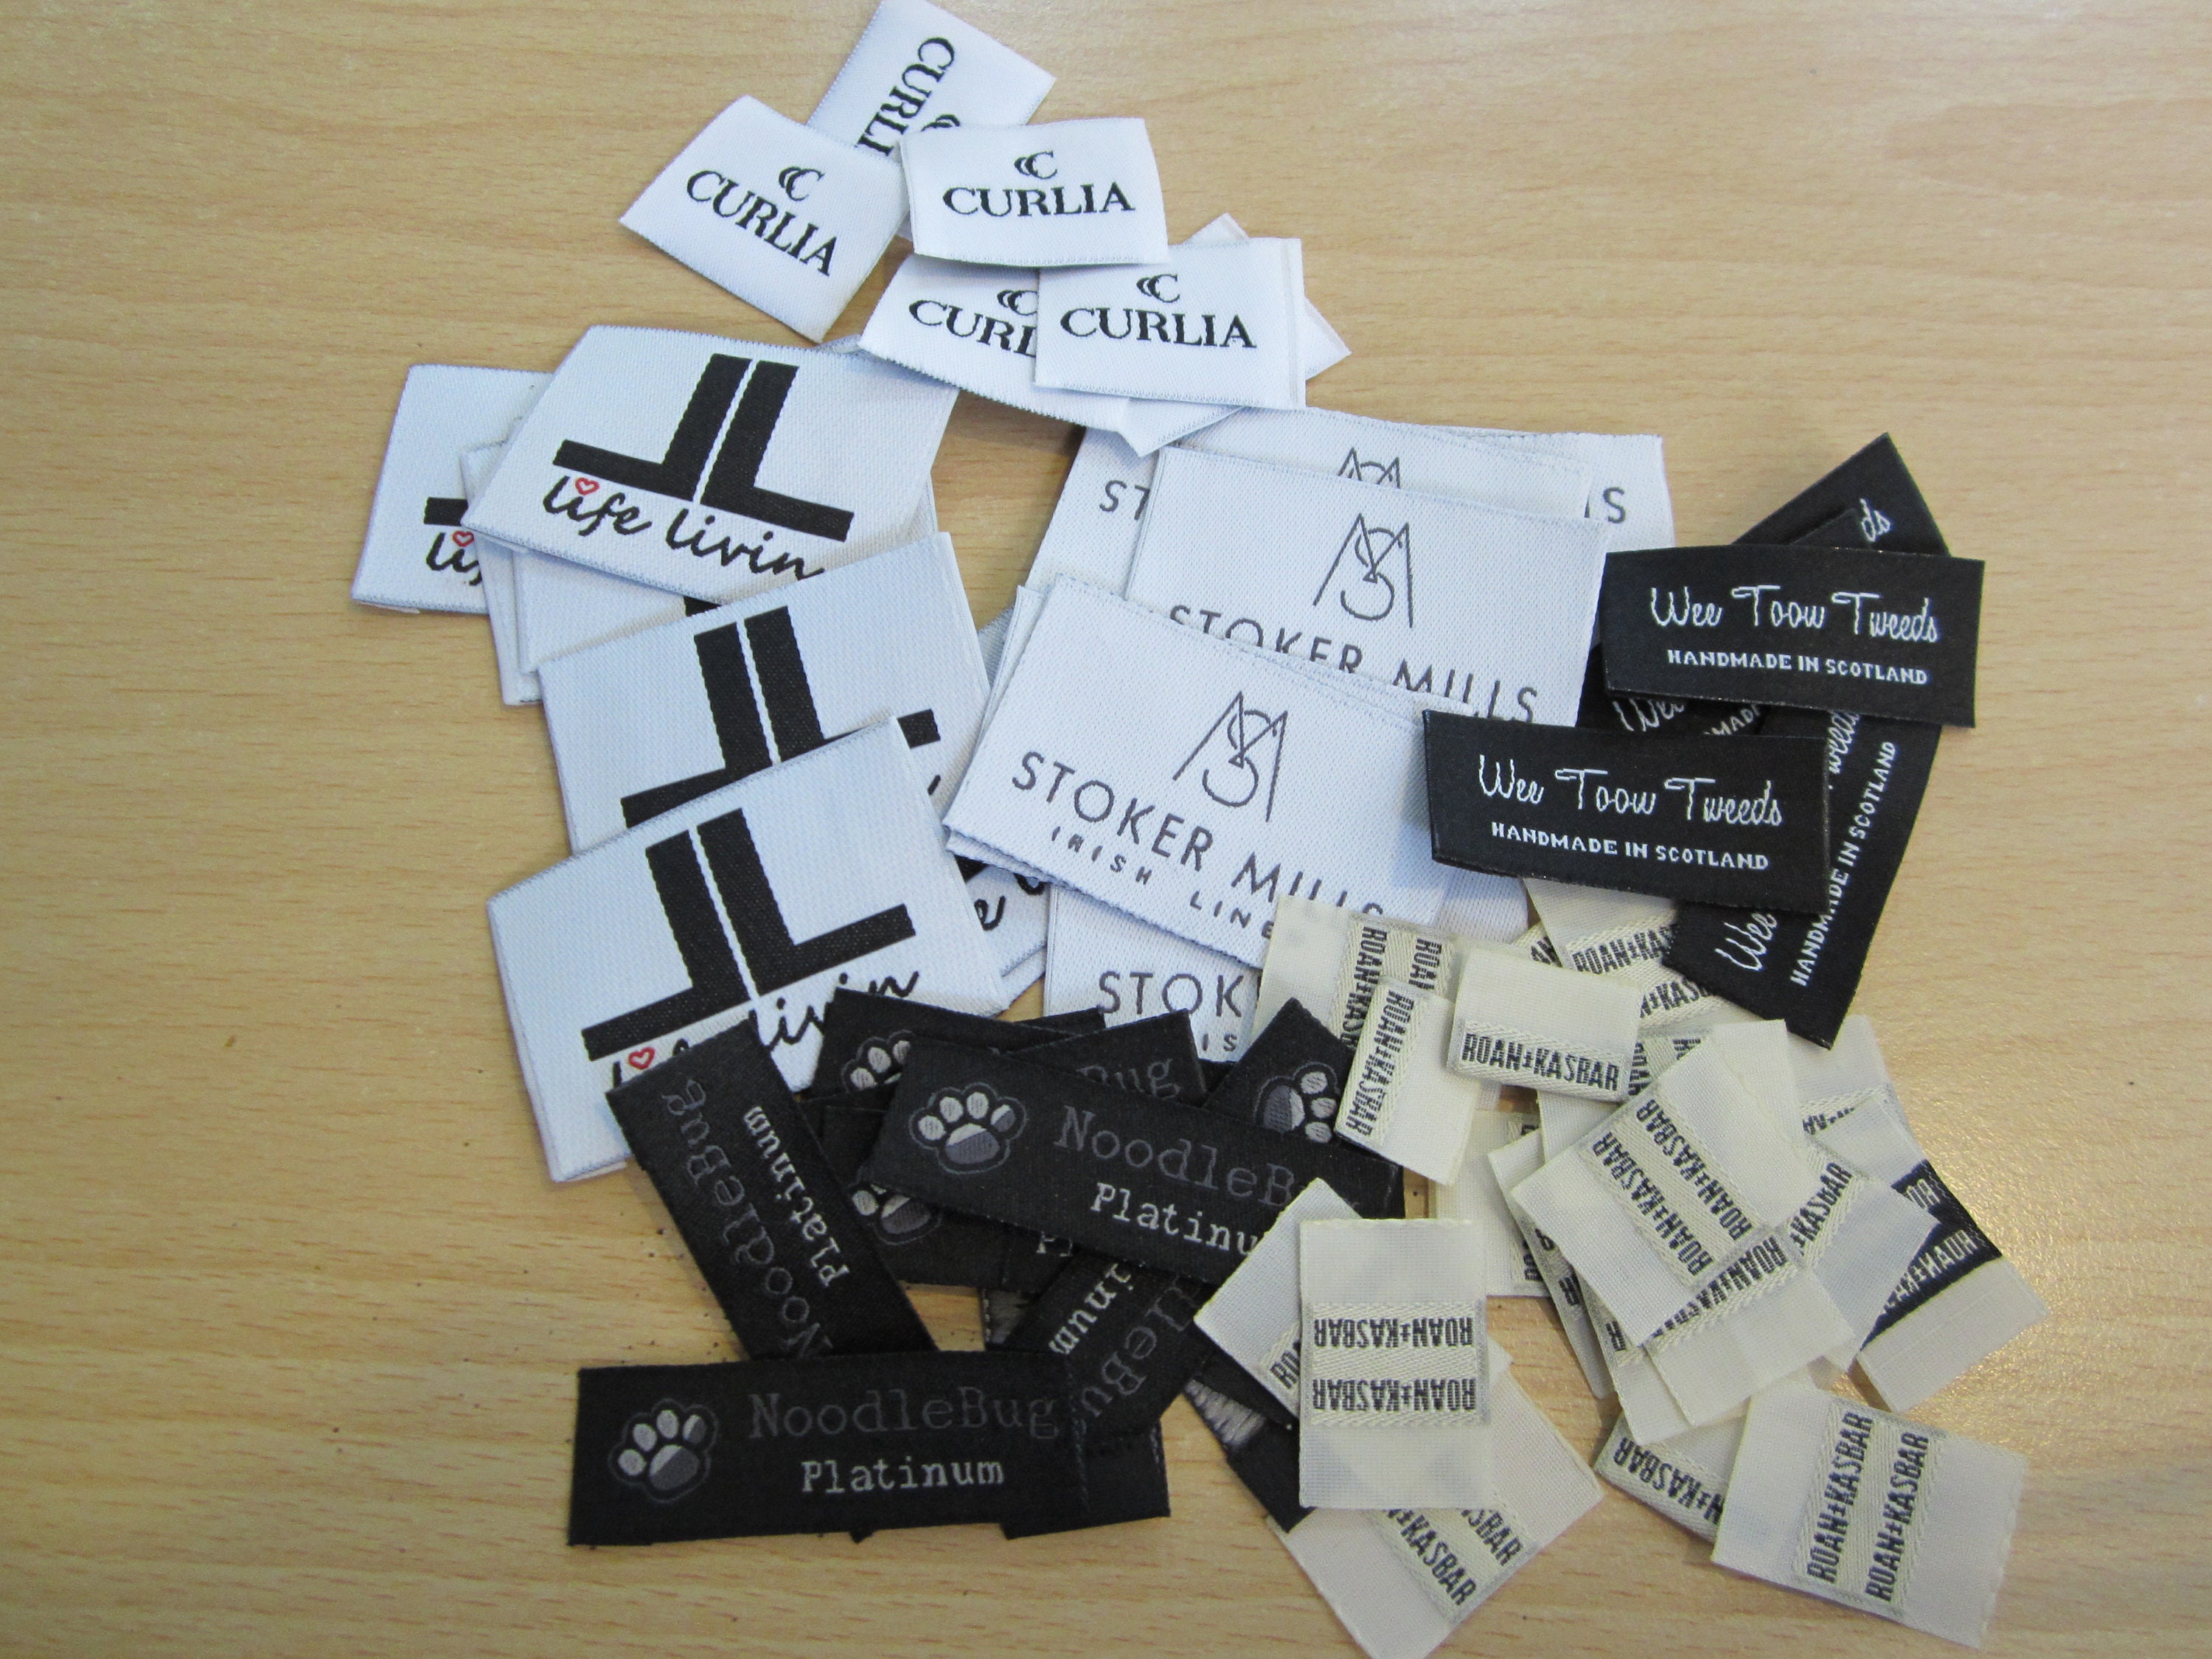 Personalized Woven Labels, Custom Clothing Labels, Sewing Labels, Knit  Labels, Crochet Labels, Name Labels, Clothes Tags, Fabric Labels 